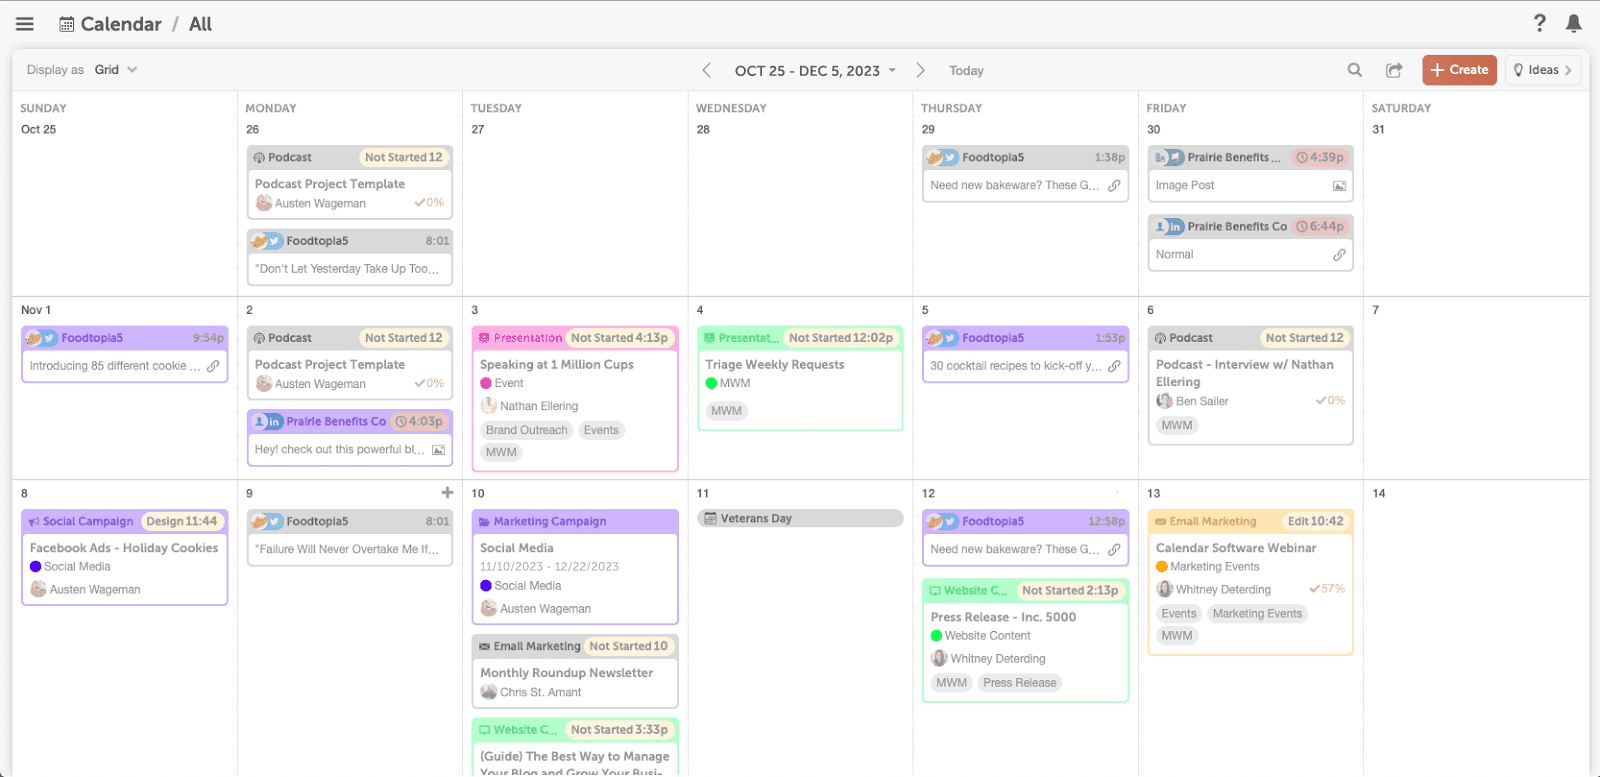 CoSchedule Marketing Calendar provides a top-down view of projects